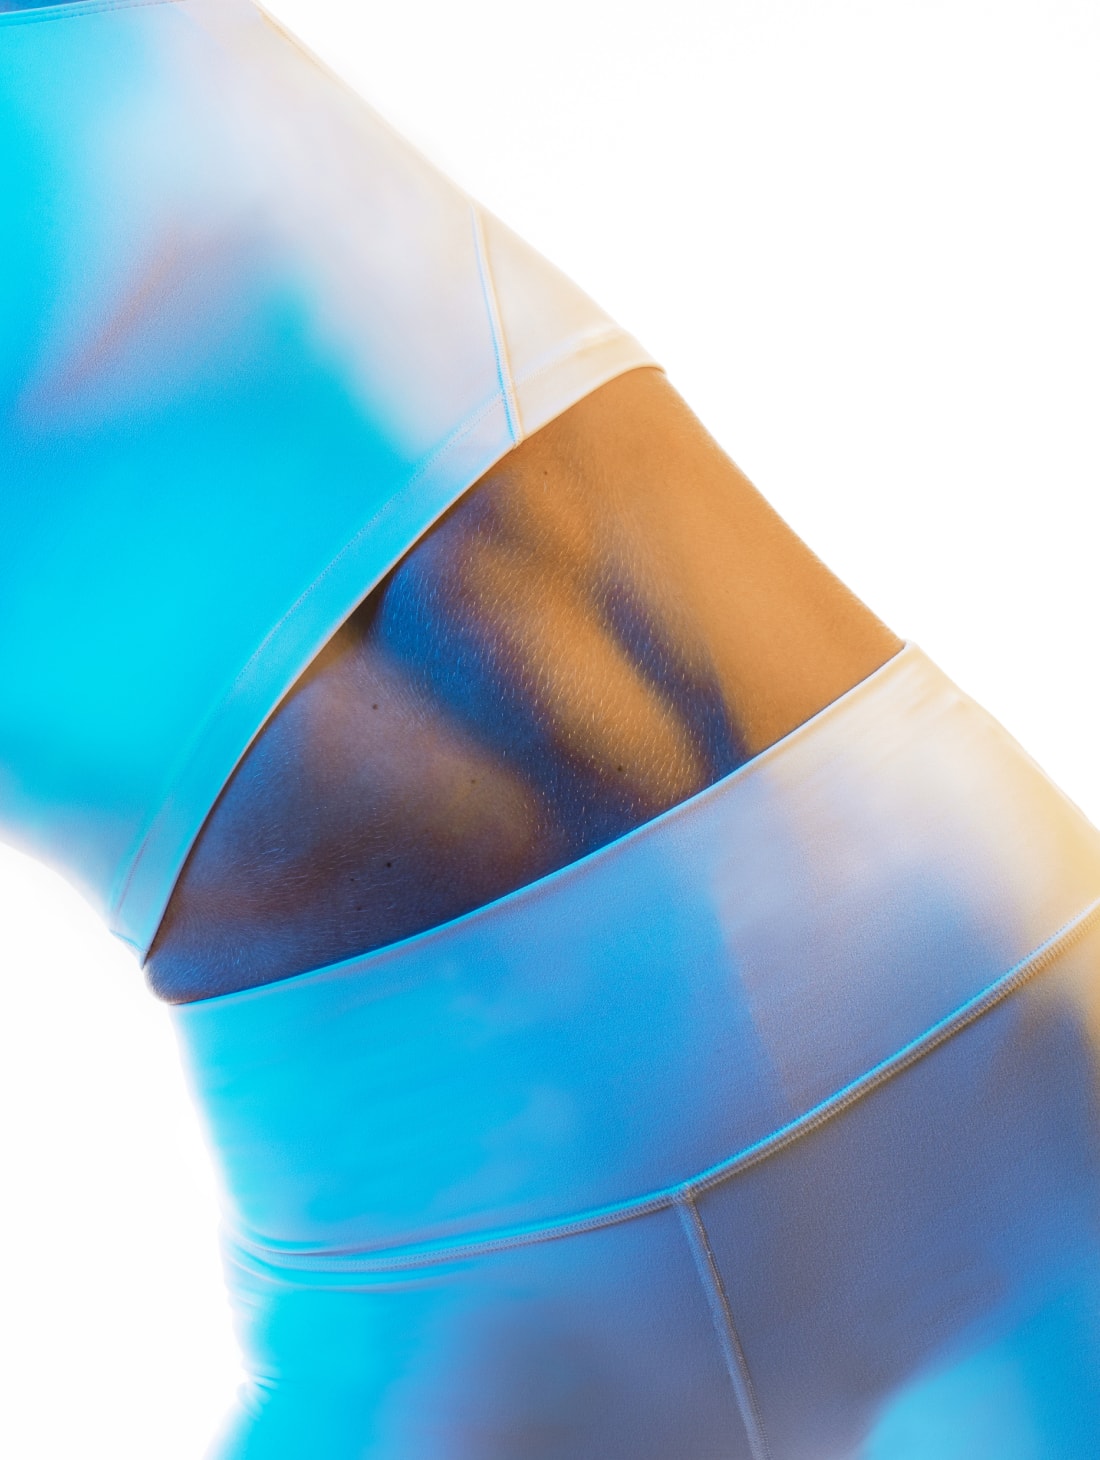 The torso of a woman with white leggings and white crop top with abdominal muscles and a bright blue tint to the image with a white background